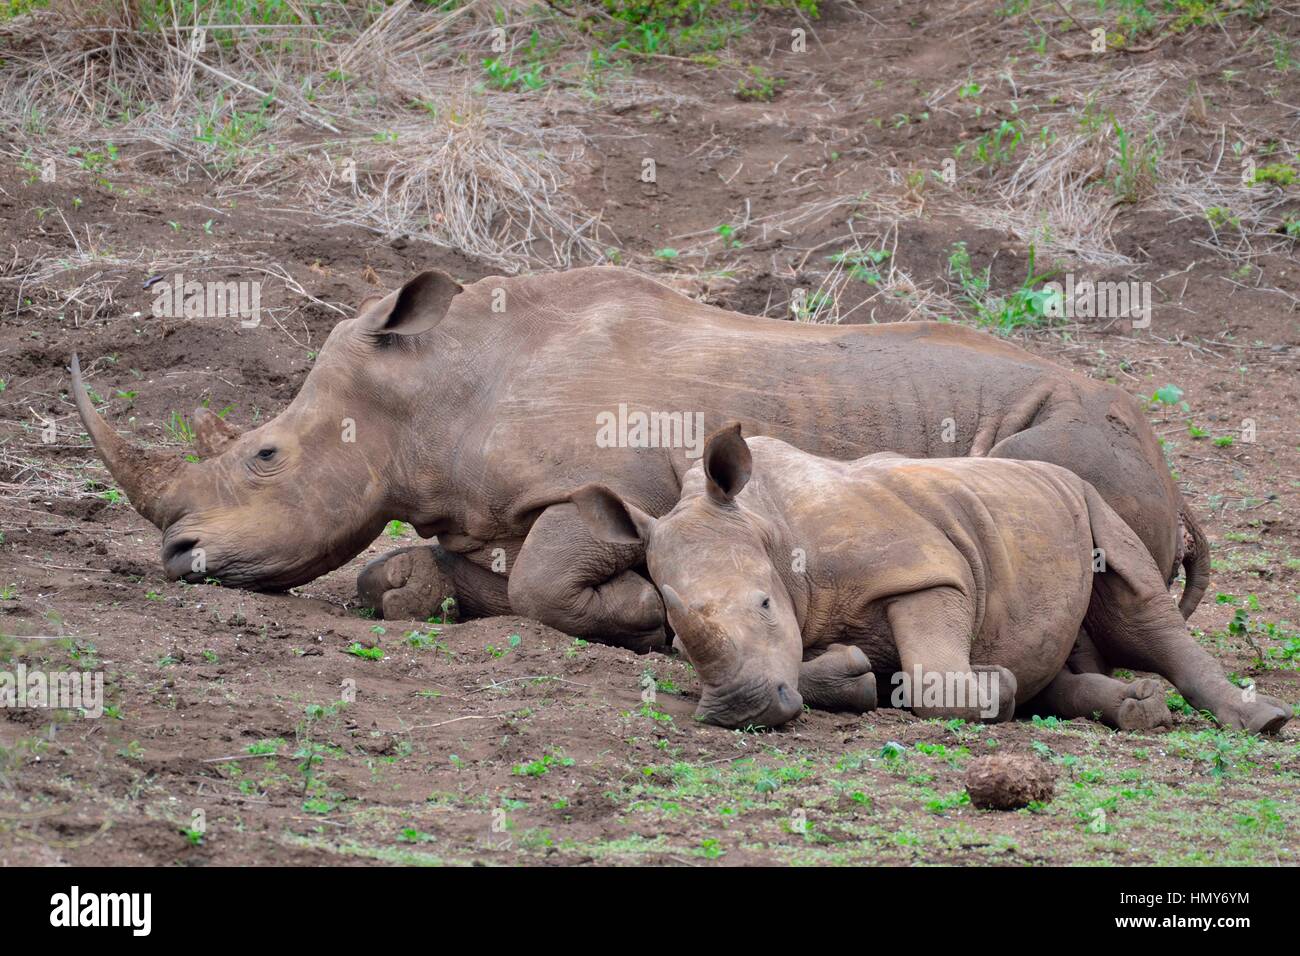 White rhinoceroses (Ceratotherium simum), mother with calf, early in the morning, Kruger National Park, South Africa, Africa Stock Photo